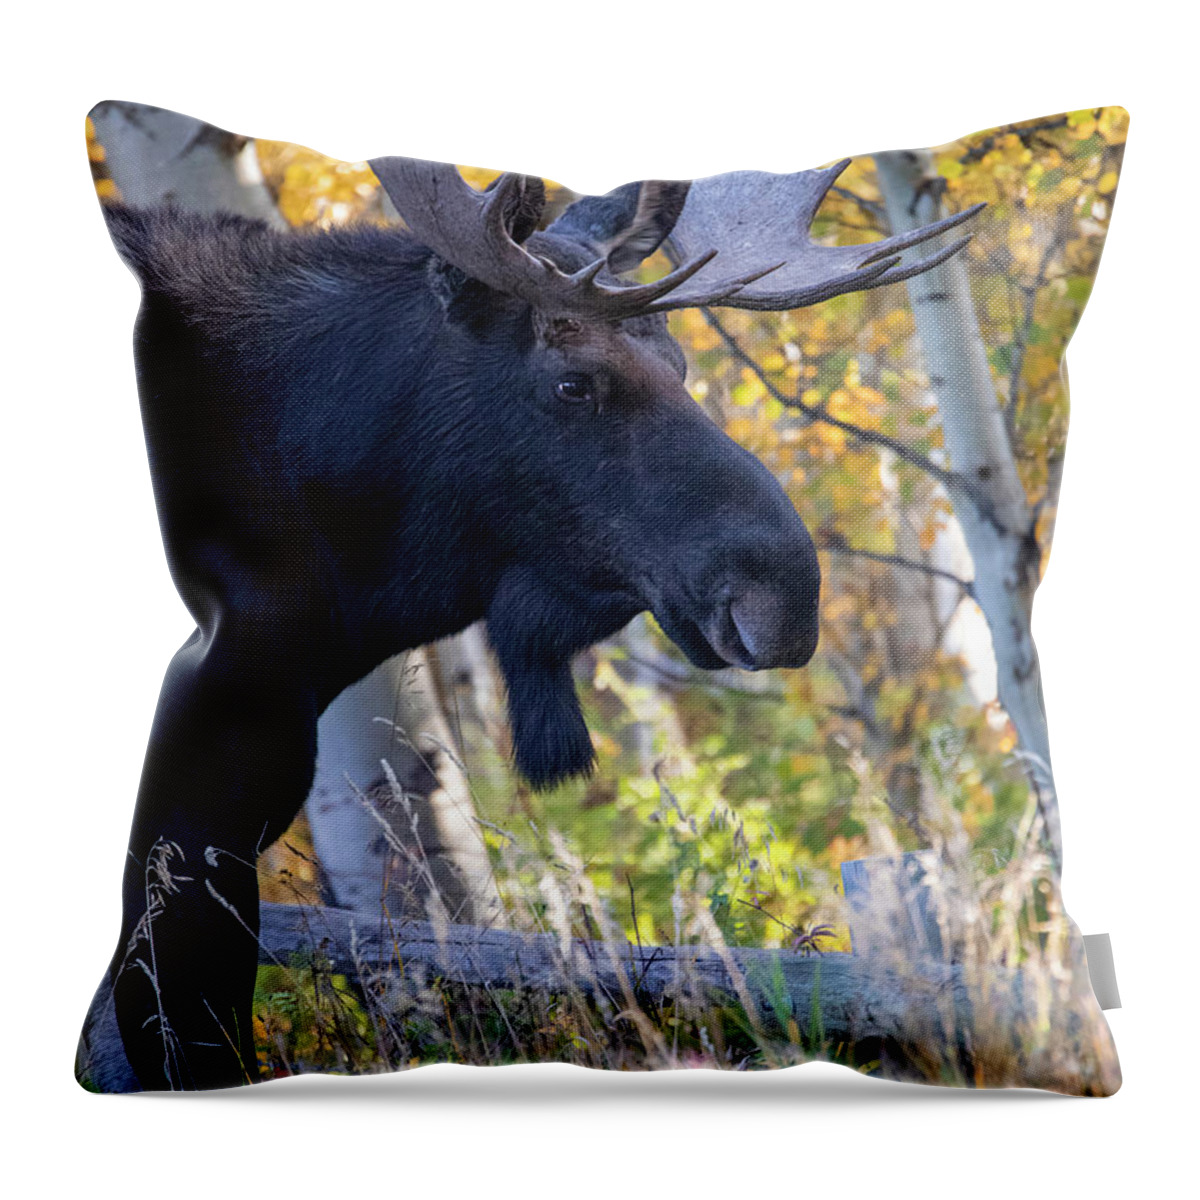 Bull Moose In Autumn Aspens Throw Pillow featuring the photograph Large Bull Moose In Autumn Foliage by Dan Sproul